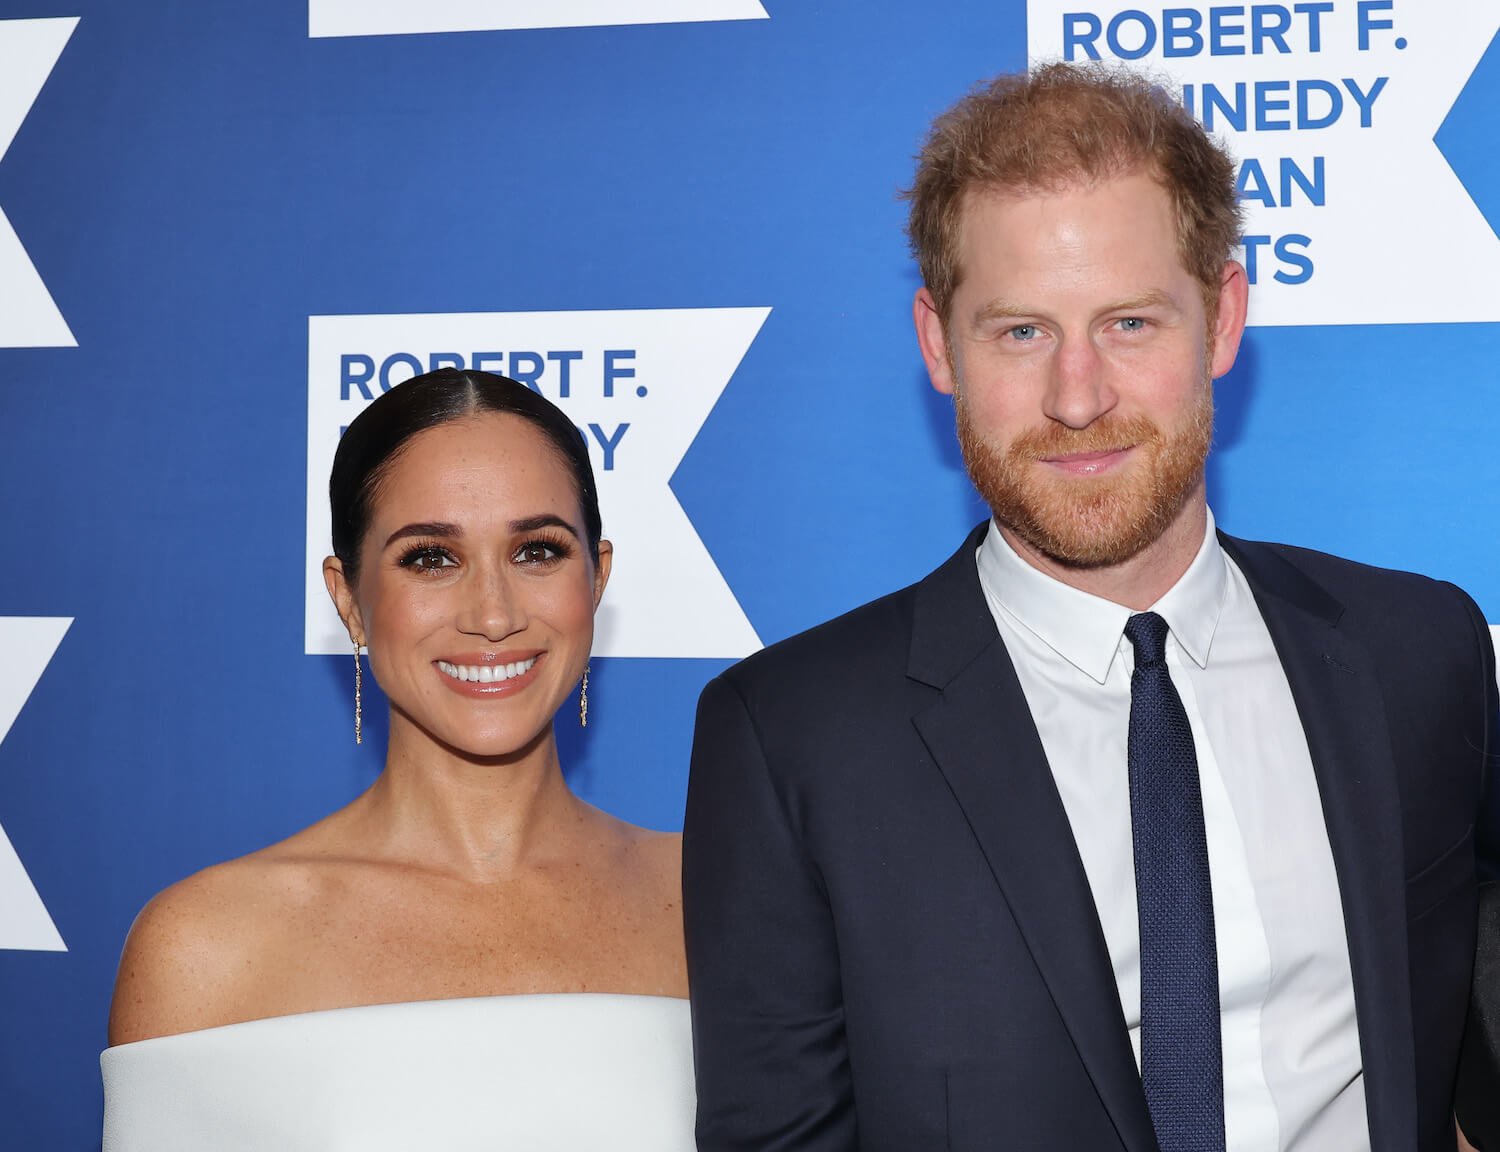 Meghan Markle wears white off the shoulder dress and smiles next to Prince Harry who grins while wearing a suit and tie